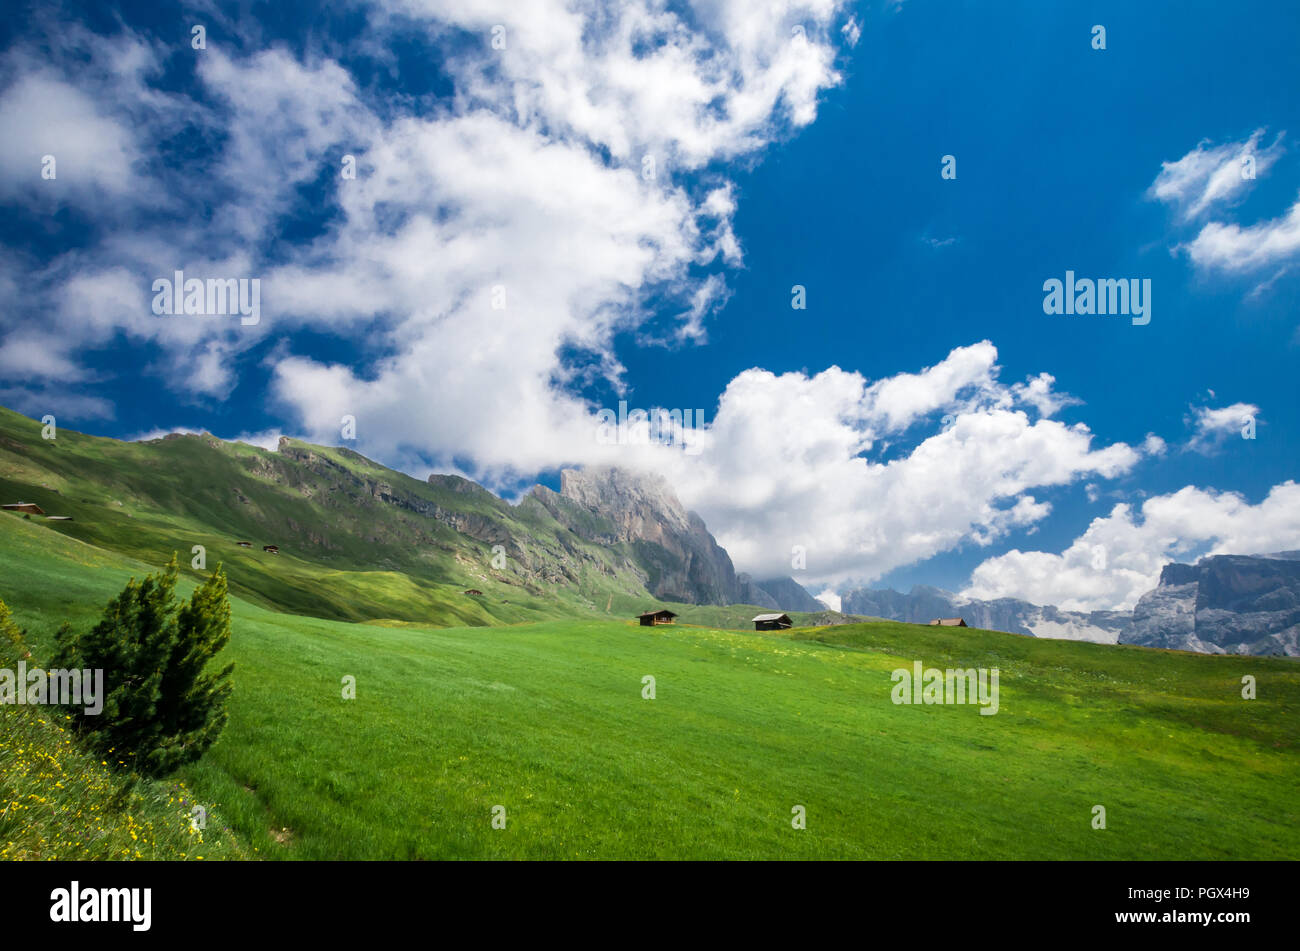 Gruppo delle Odle, view from Col Raiser. Puez Odle massif in Dolomites mountains, Italy, South Tyrol Alps, Alto Adige, Val Gardena, Geislergruppe Stock Photo